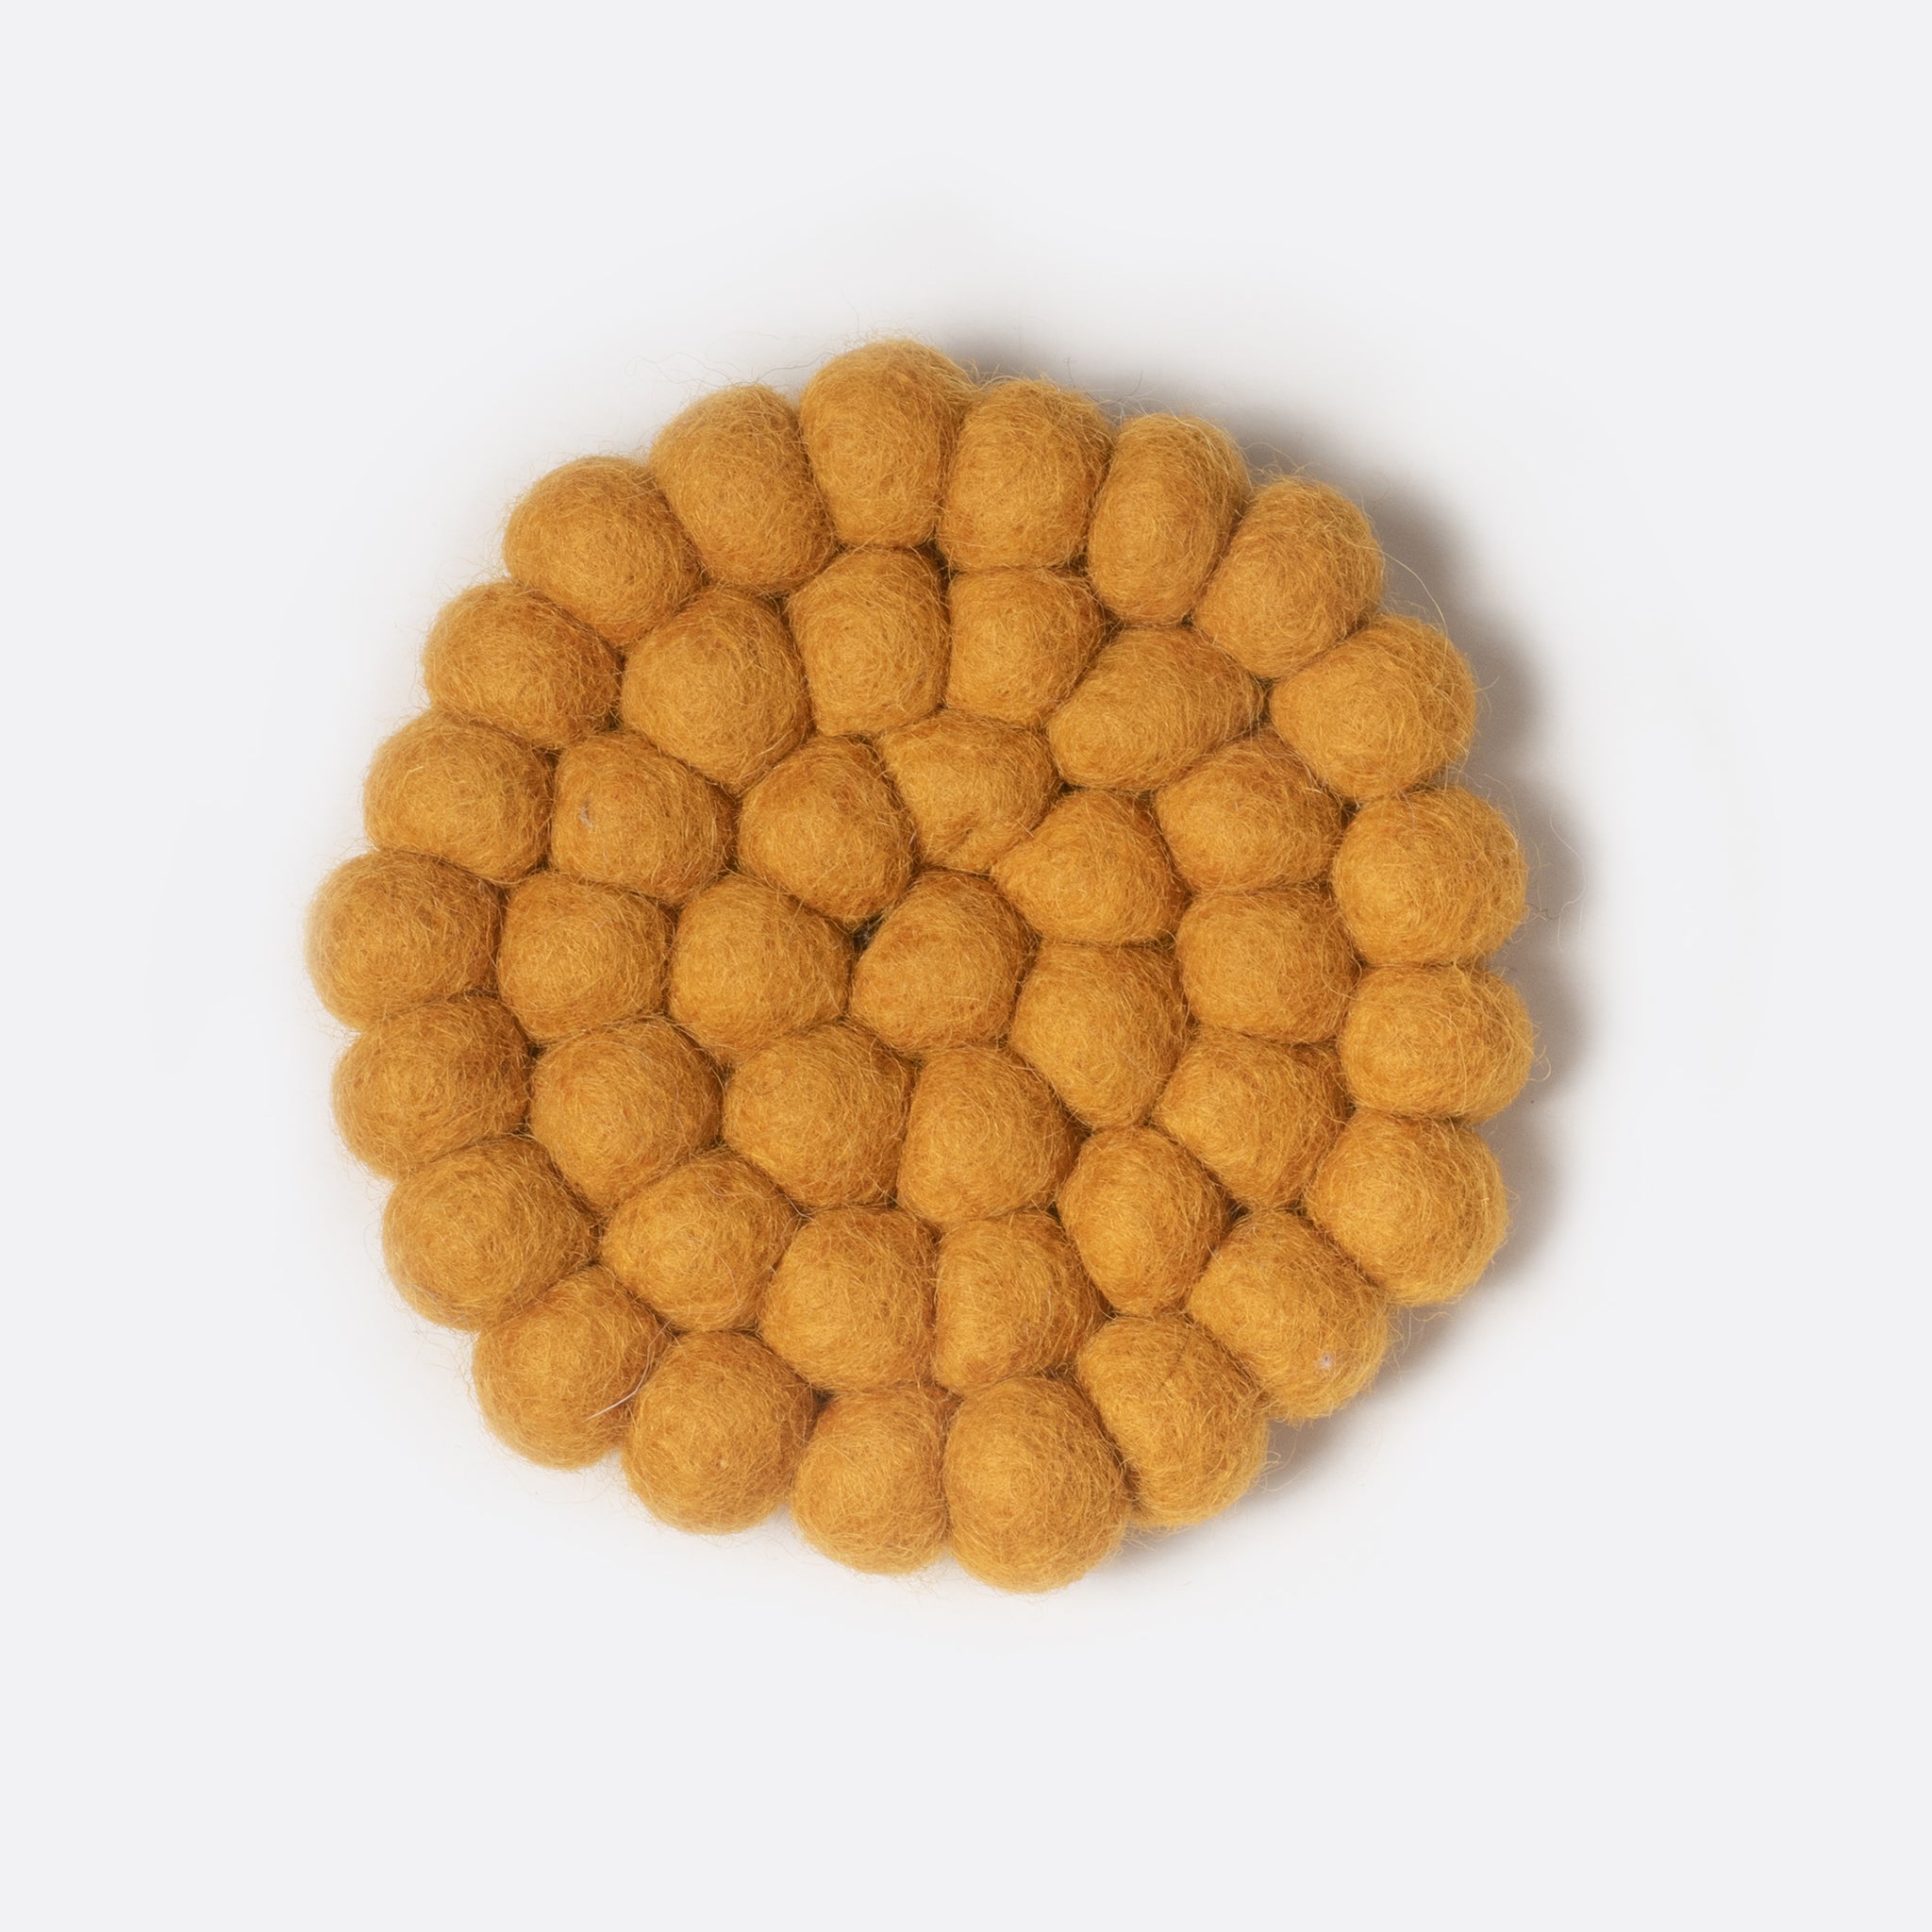 Round small felt coaster which is made from little felt balls. The color is yellow mustard.